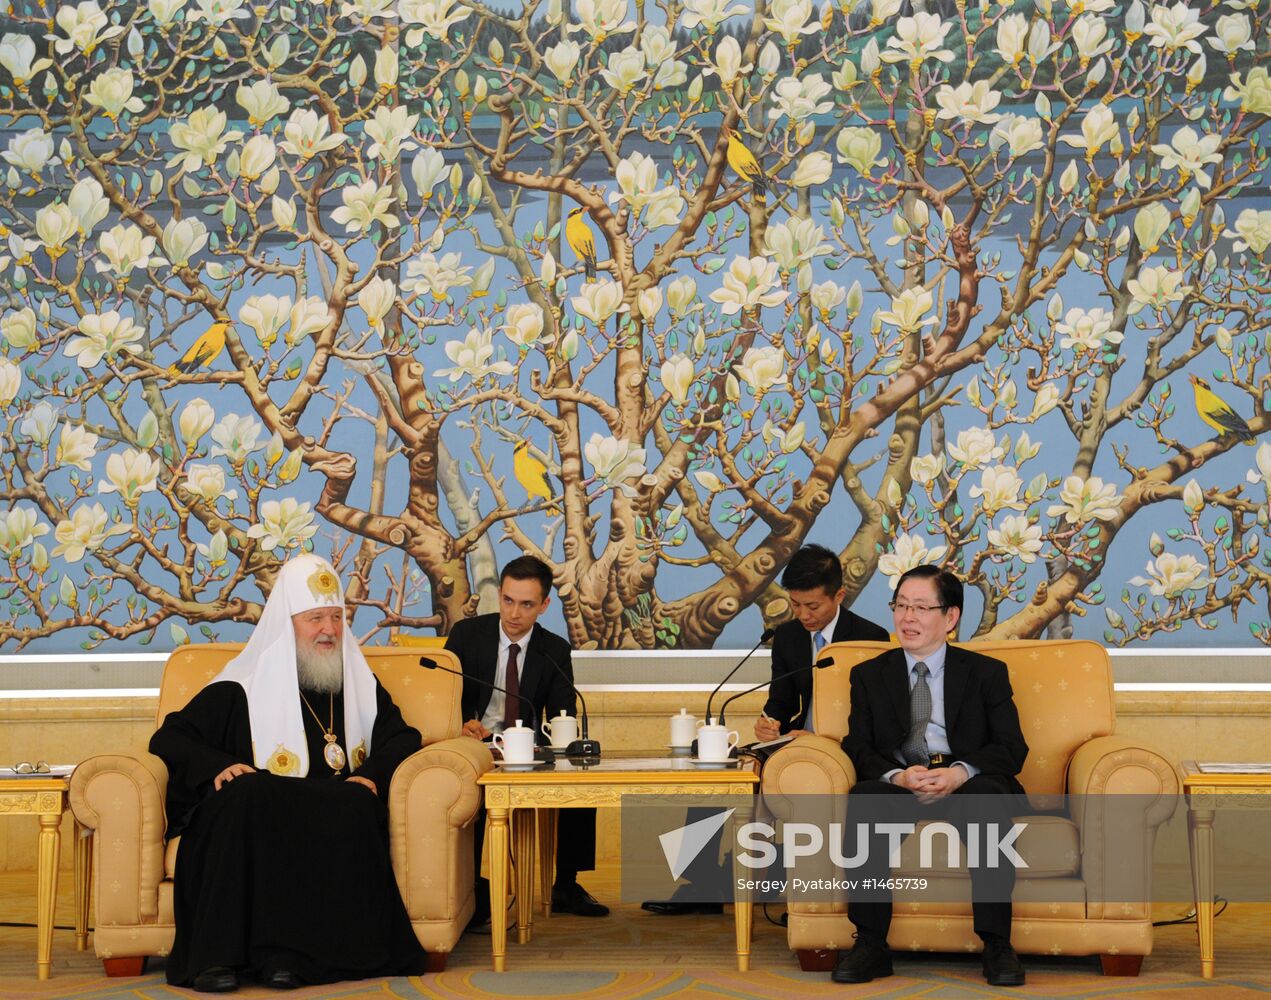 Patriarch Kirill makes first ever visit to China